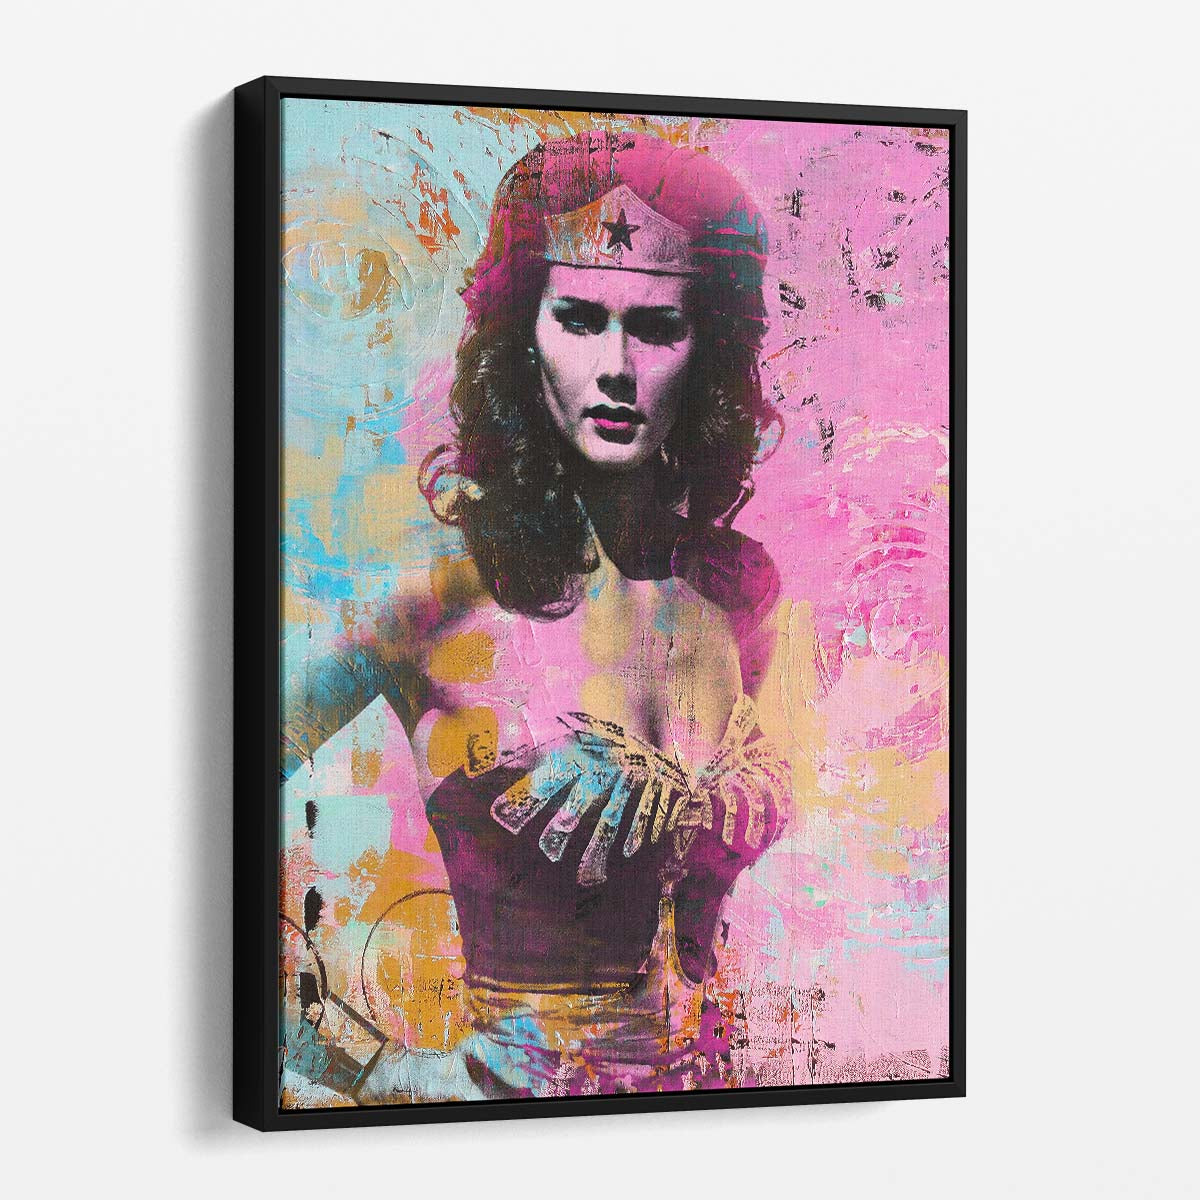 Vintage Wonder Woman Circles Graffiti Wall Art by Luxuriance Designs. Made in USA.